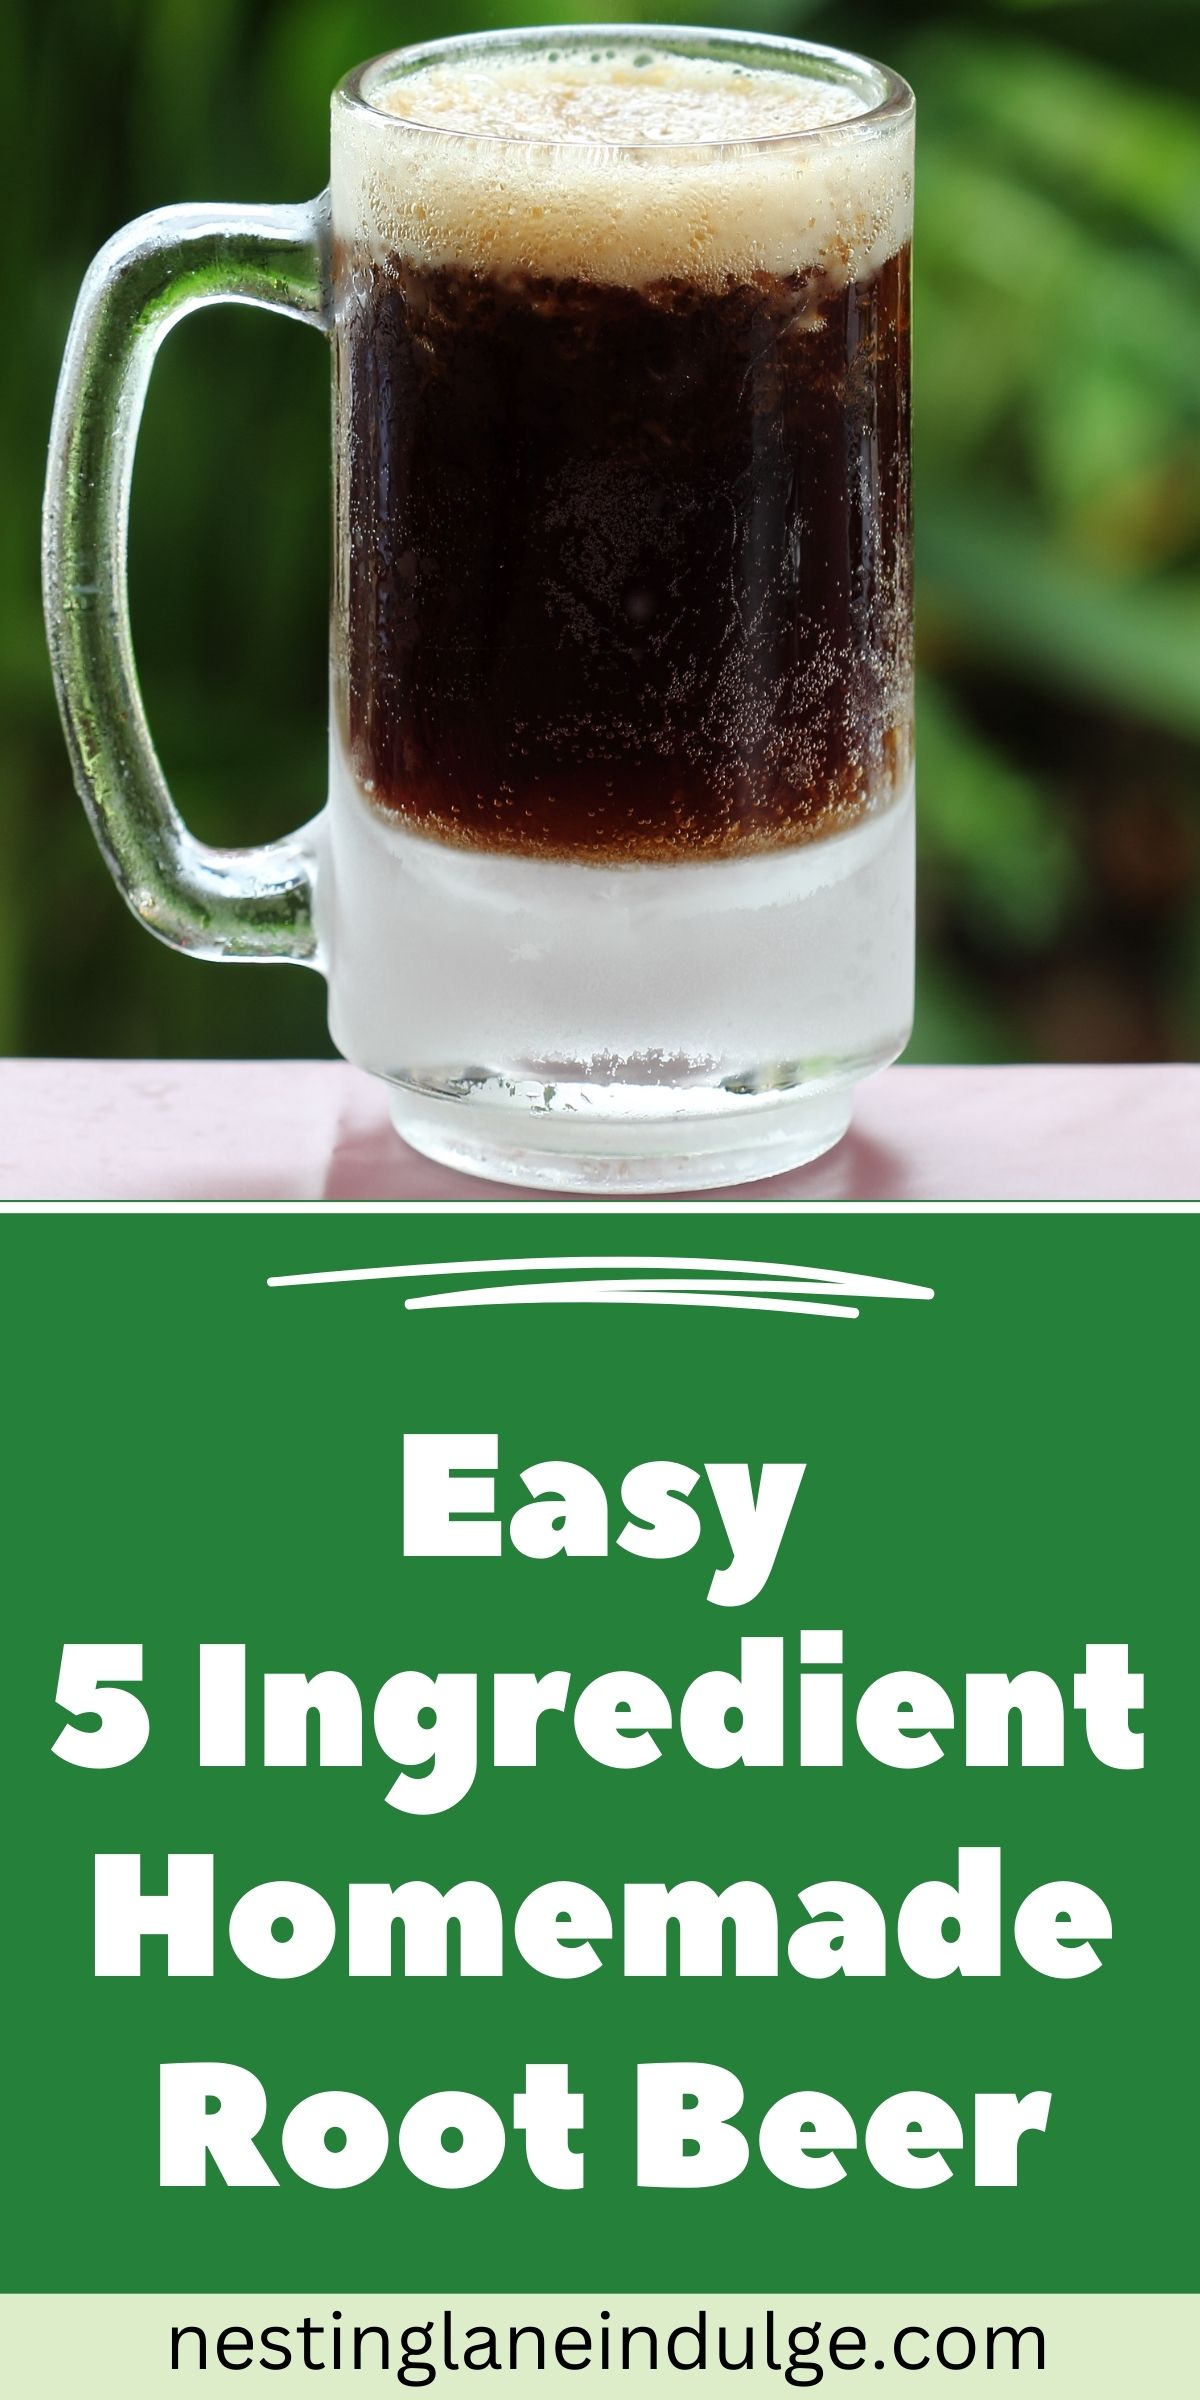 Graphic for Pinterest of 5 Ingredient Homemade Root Beer Recipe.